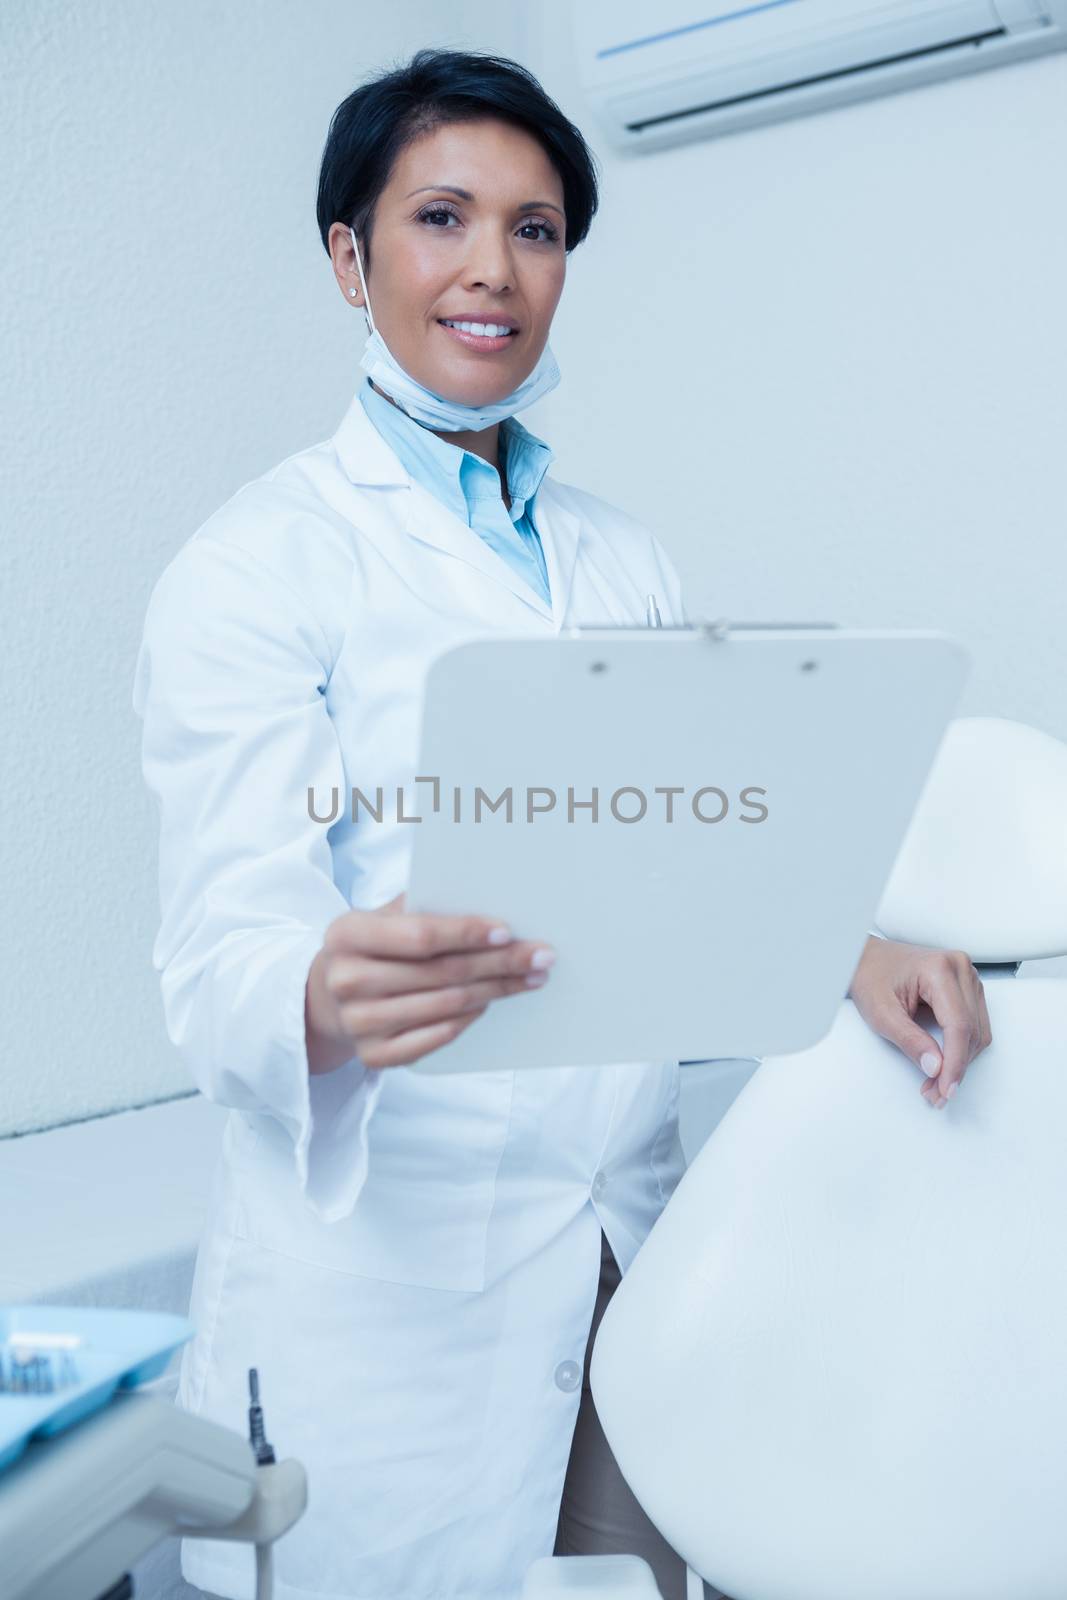 Portrait of smiling young female dentist holding clipboard